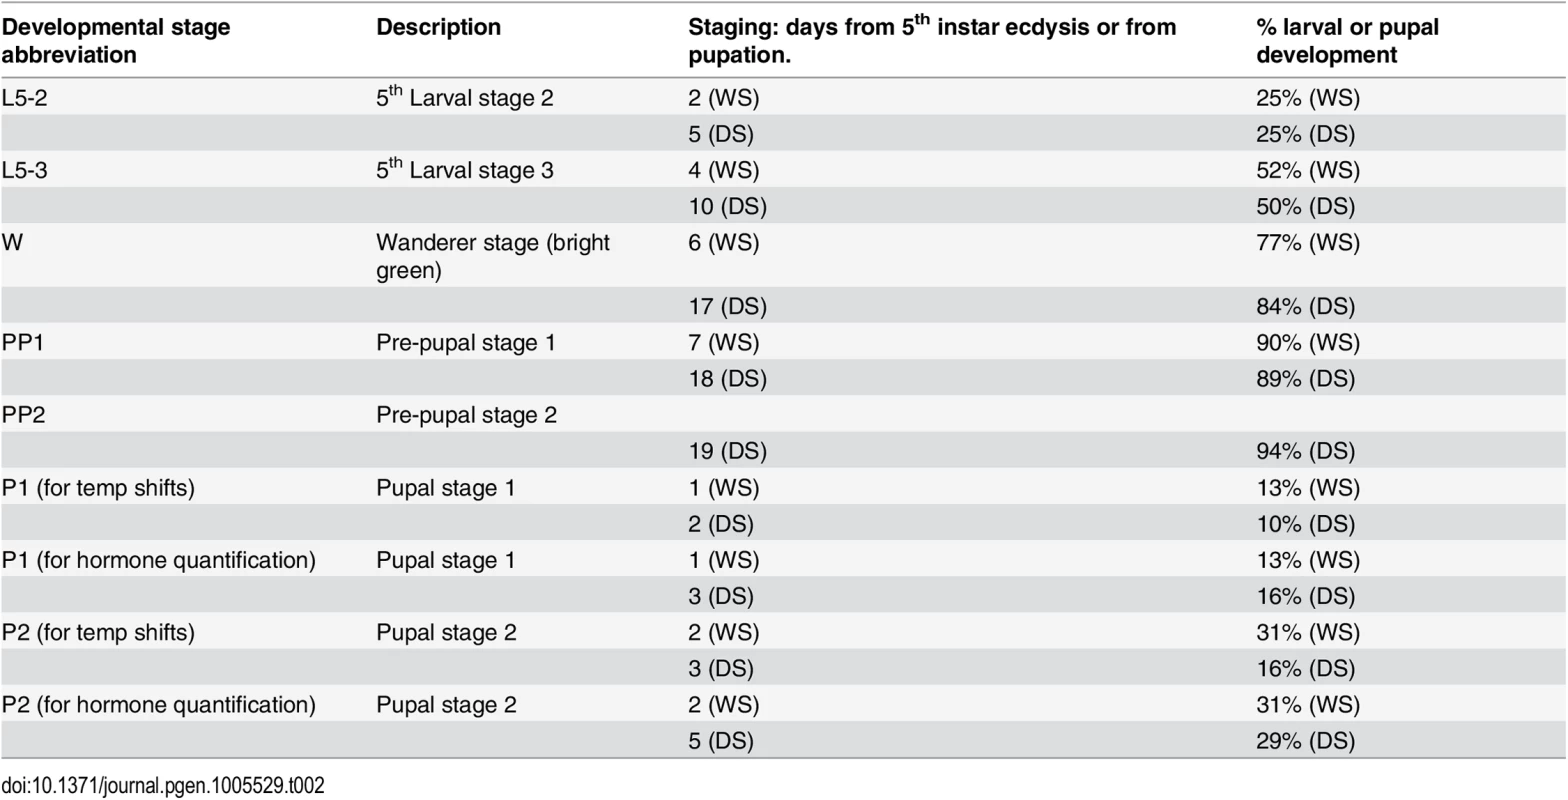 Developmental staging used in current study.